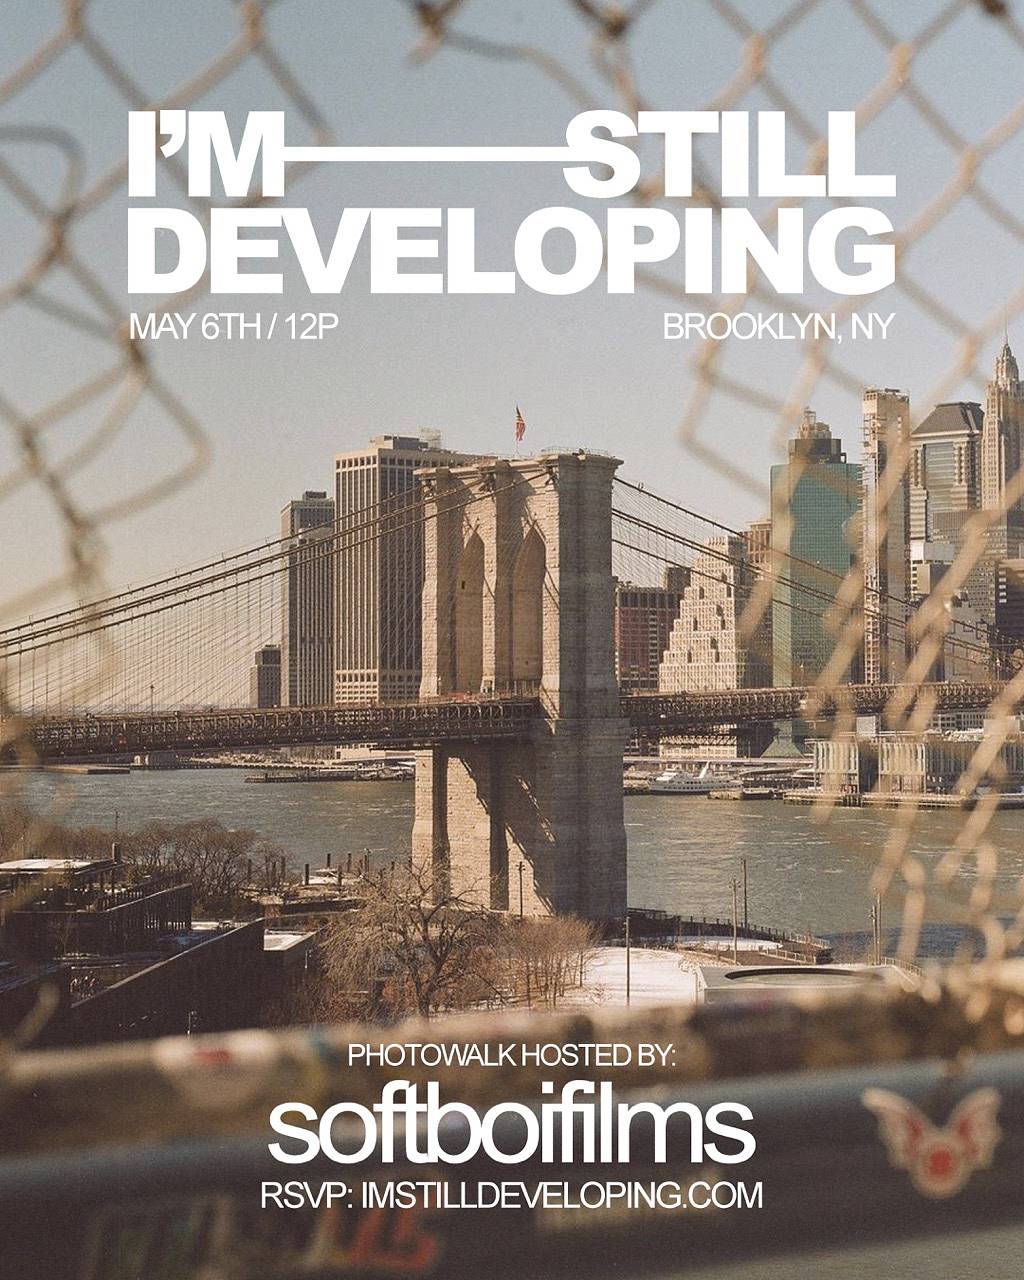 I’m Still Developing – Photowalk Hosted by @softboifilms